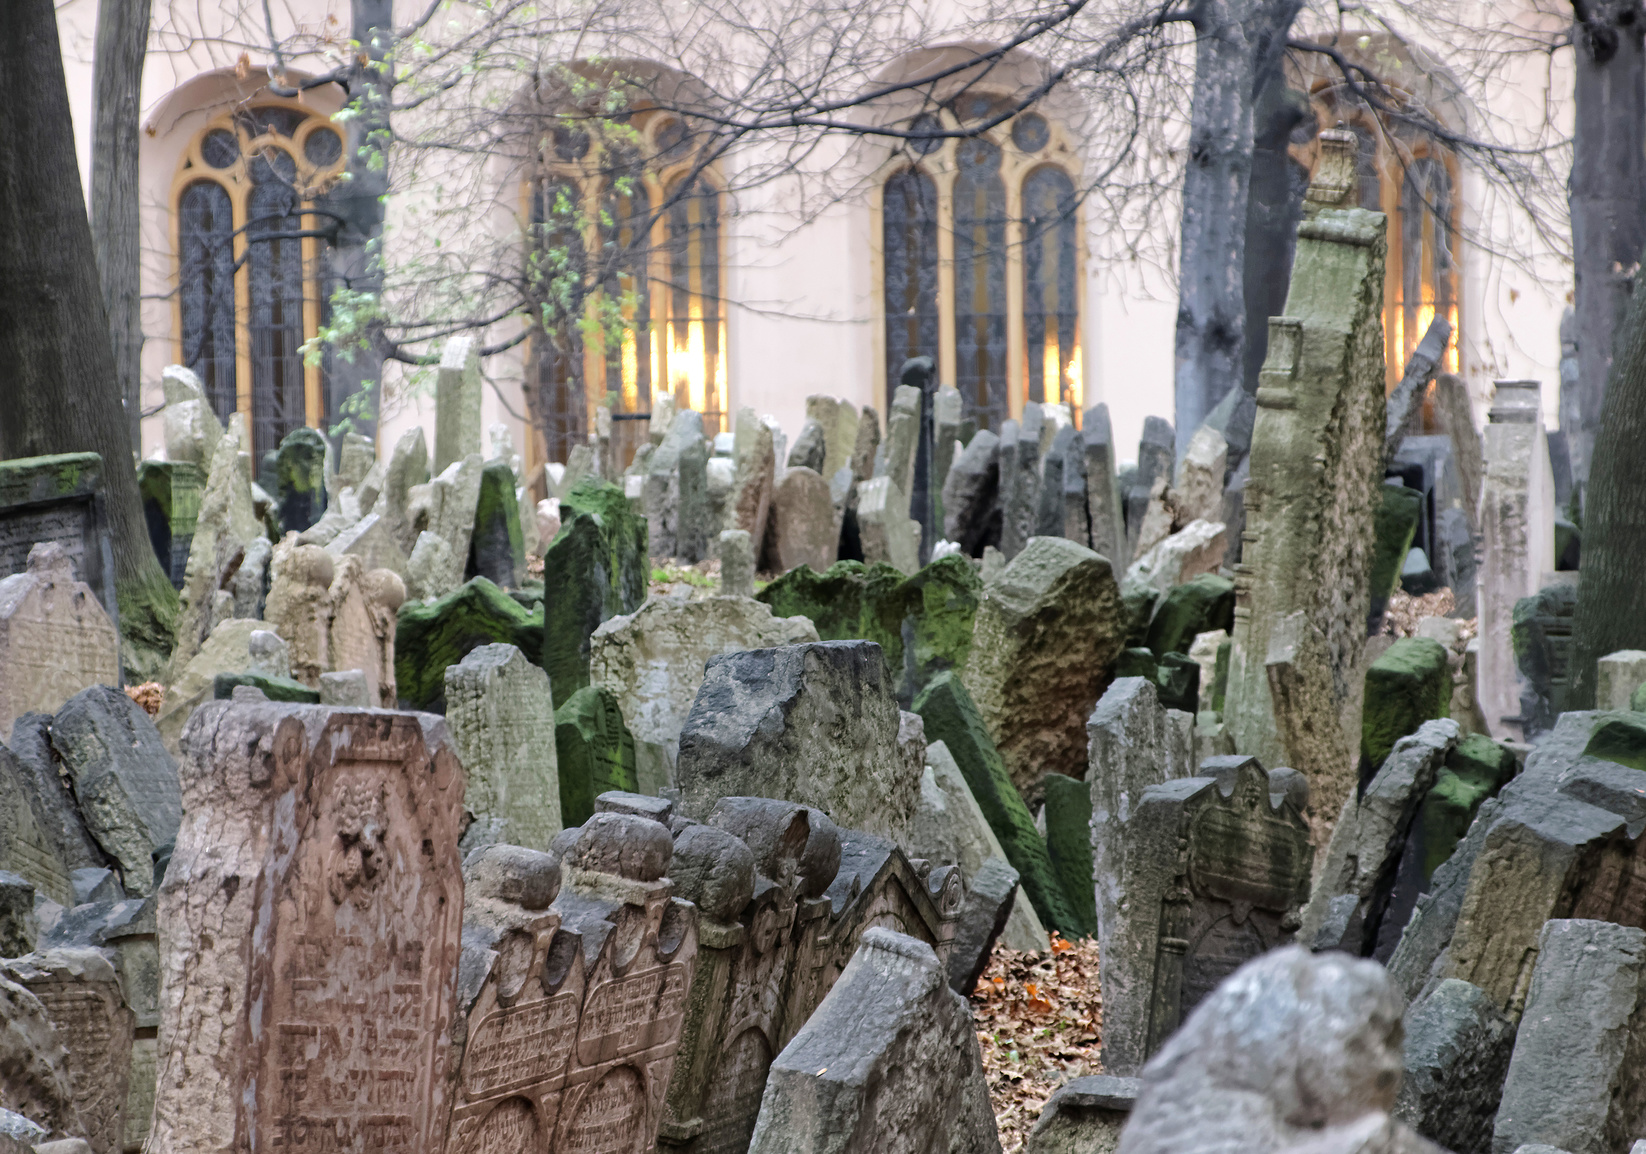 PRAGUE, CZECHIA - DEC 04, 2015: Old Jewish cemetery with lots of ancient headstones and a church in the background. December 04, 2015 in Prague, Czechia